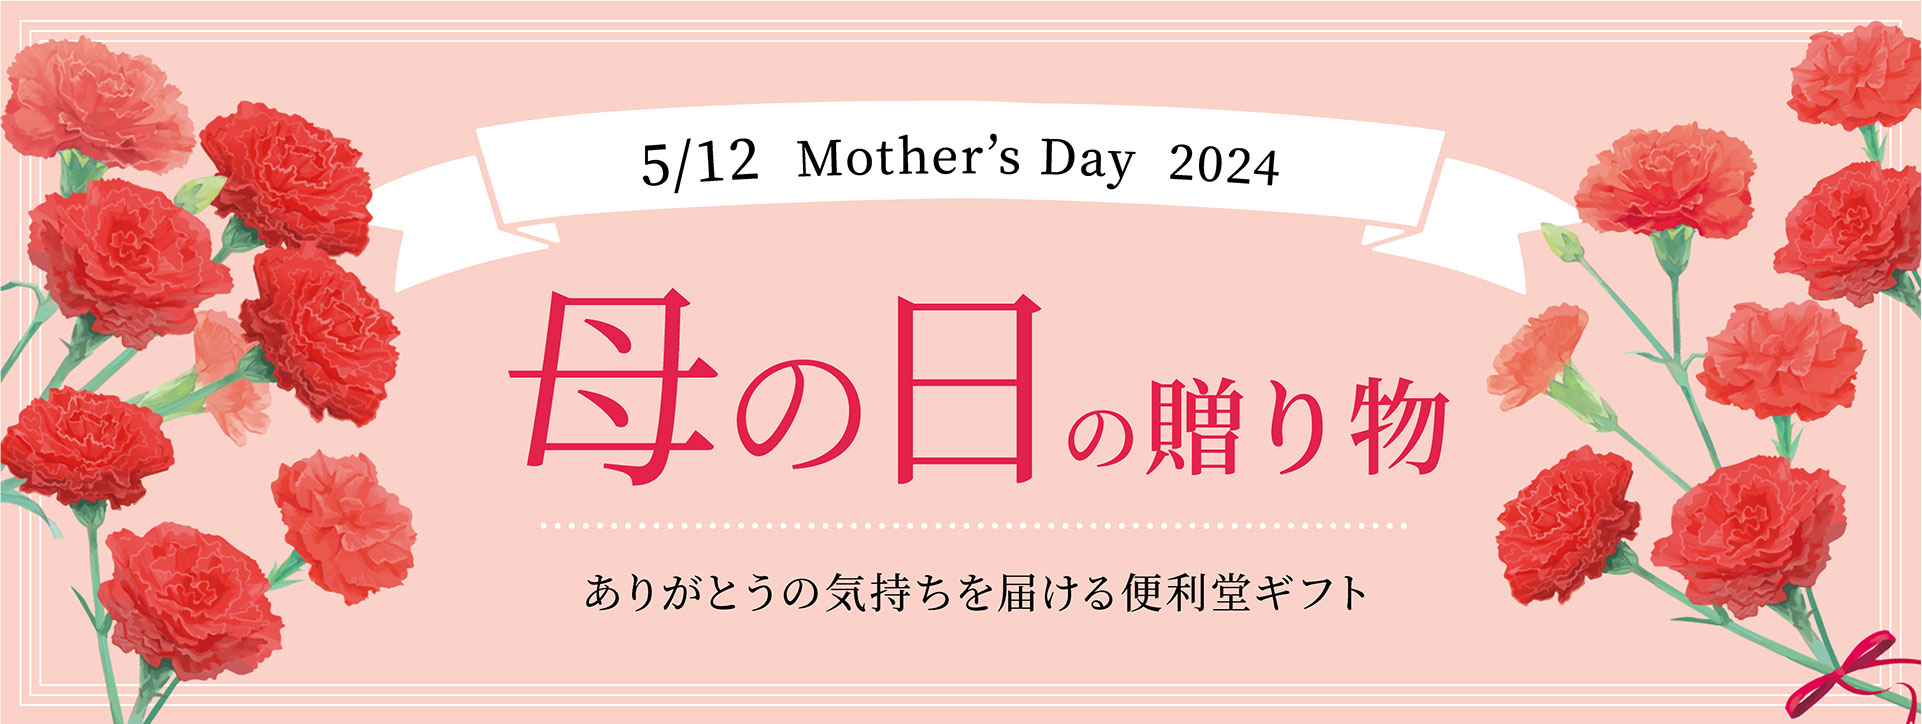 5/12 Mother's Day 2024 母の日の贈り物　ありがとうの気持ちを届ける便利堂ギフト